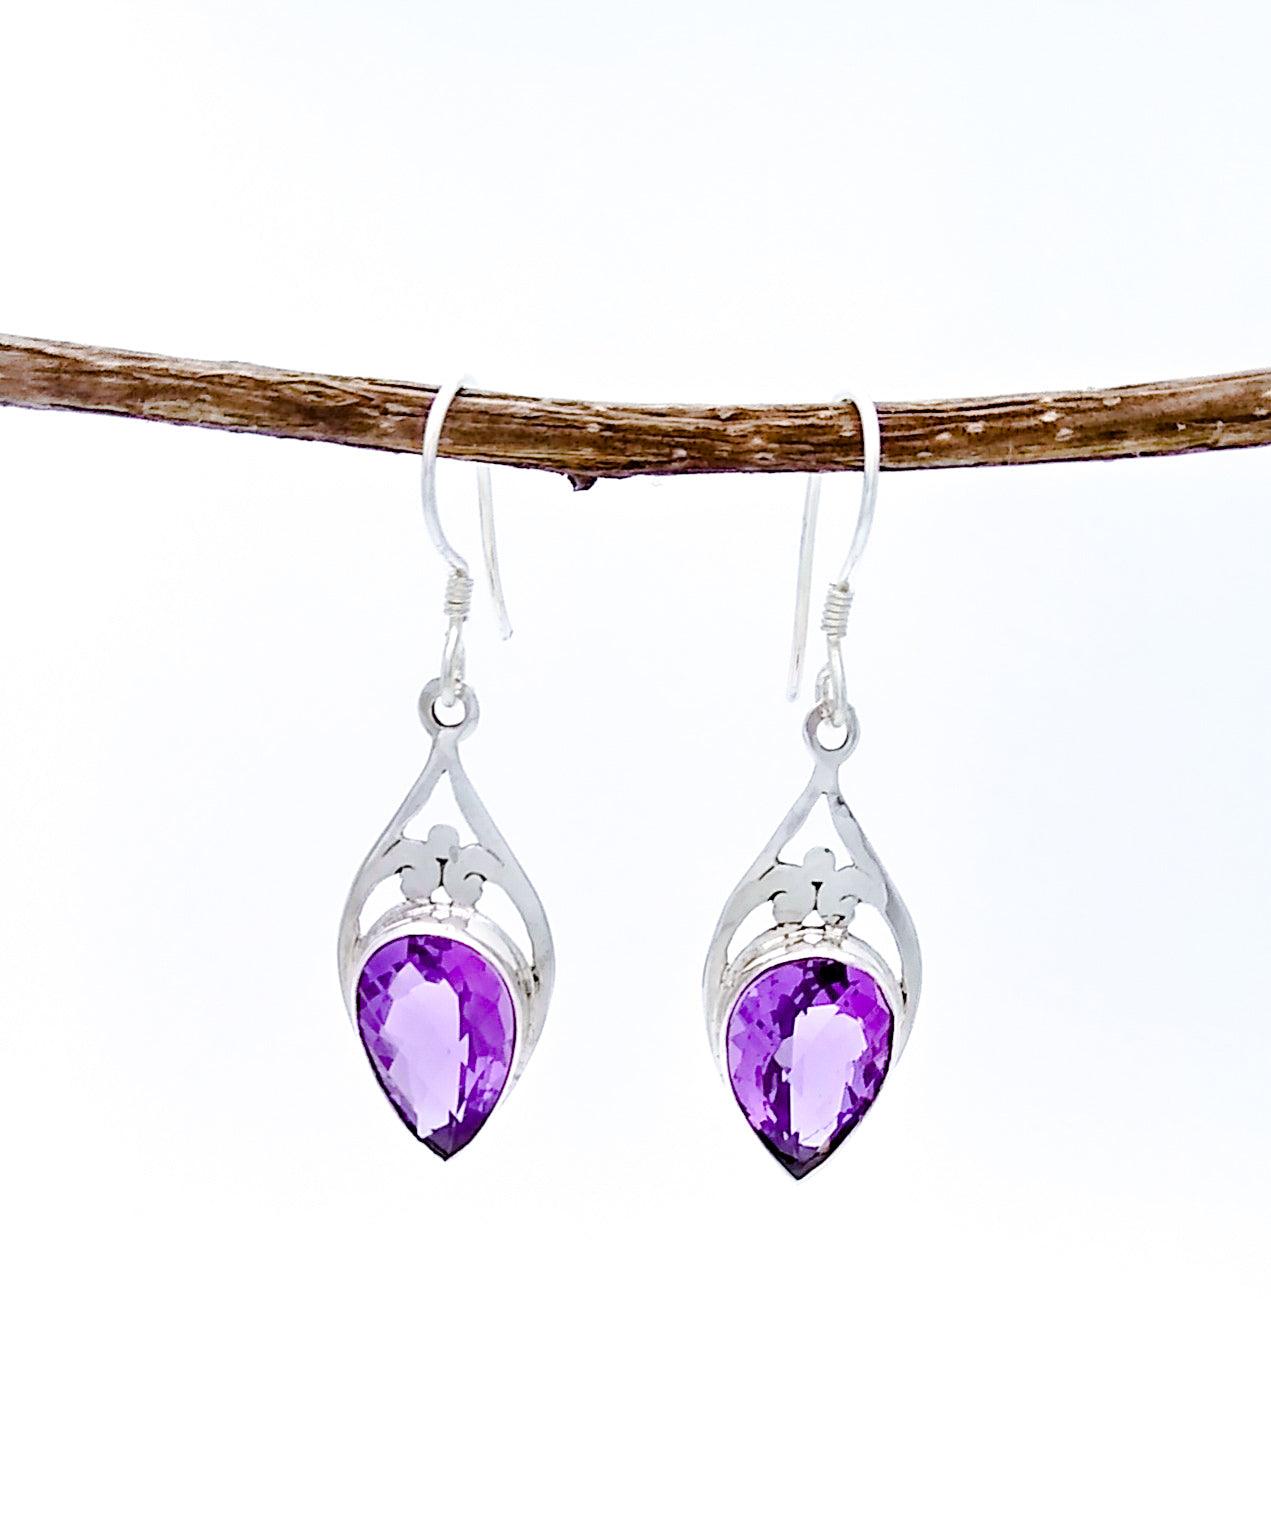 drop earring with Upside-down taeardrop shaped faceted amethyst stone set in sterling in a complementary shape to form a full diamond. The silver has decorative cutouts